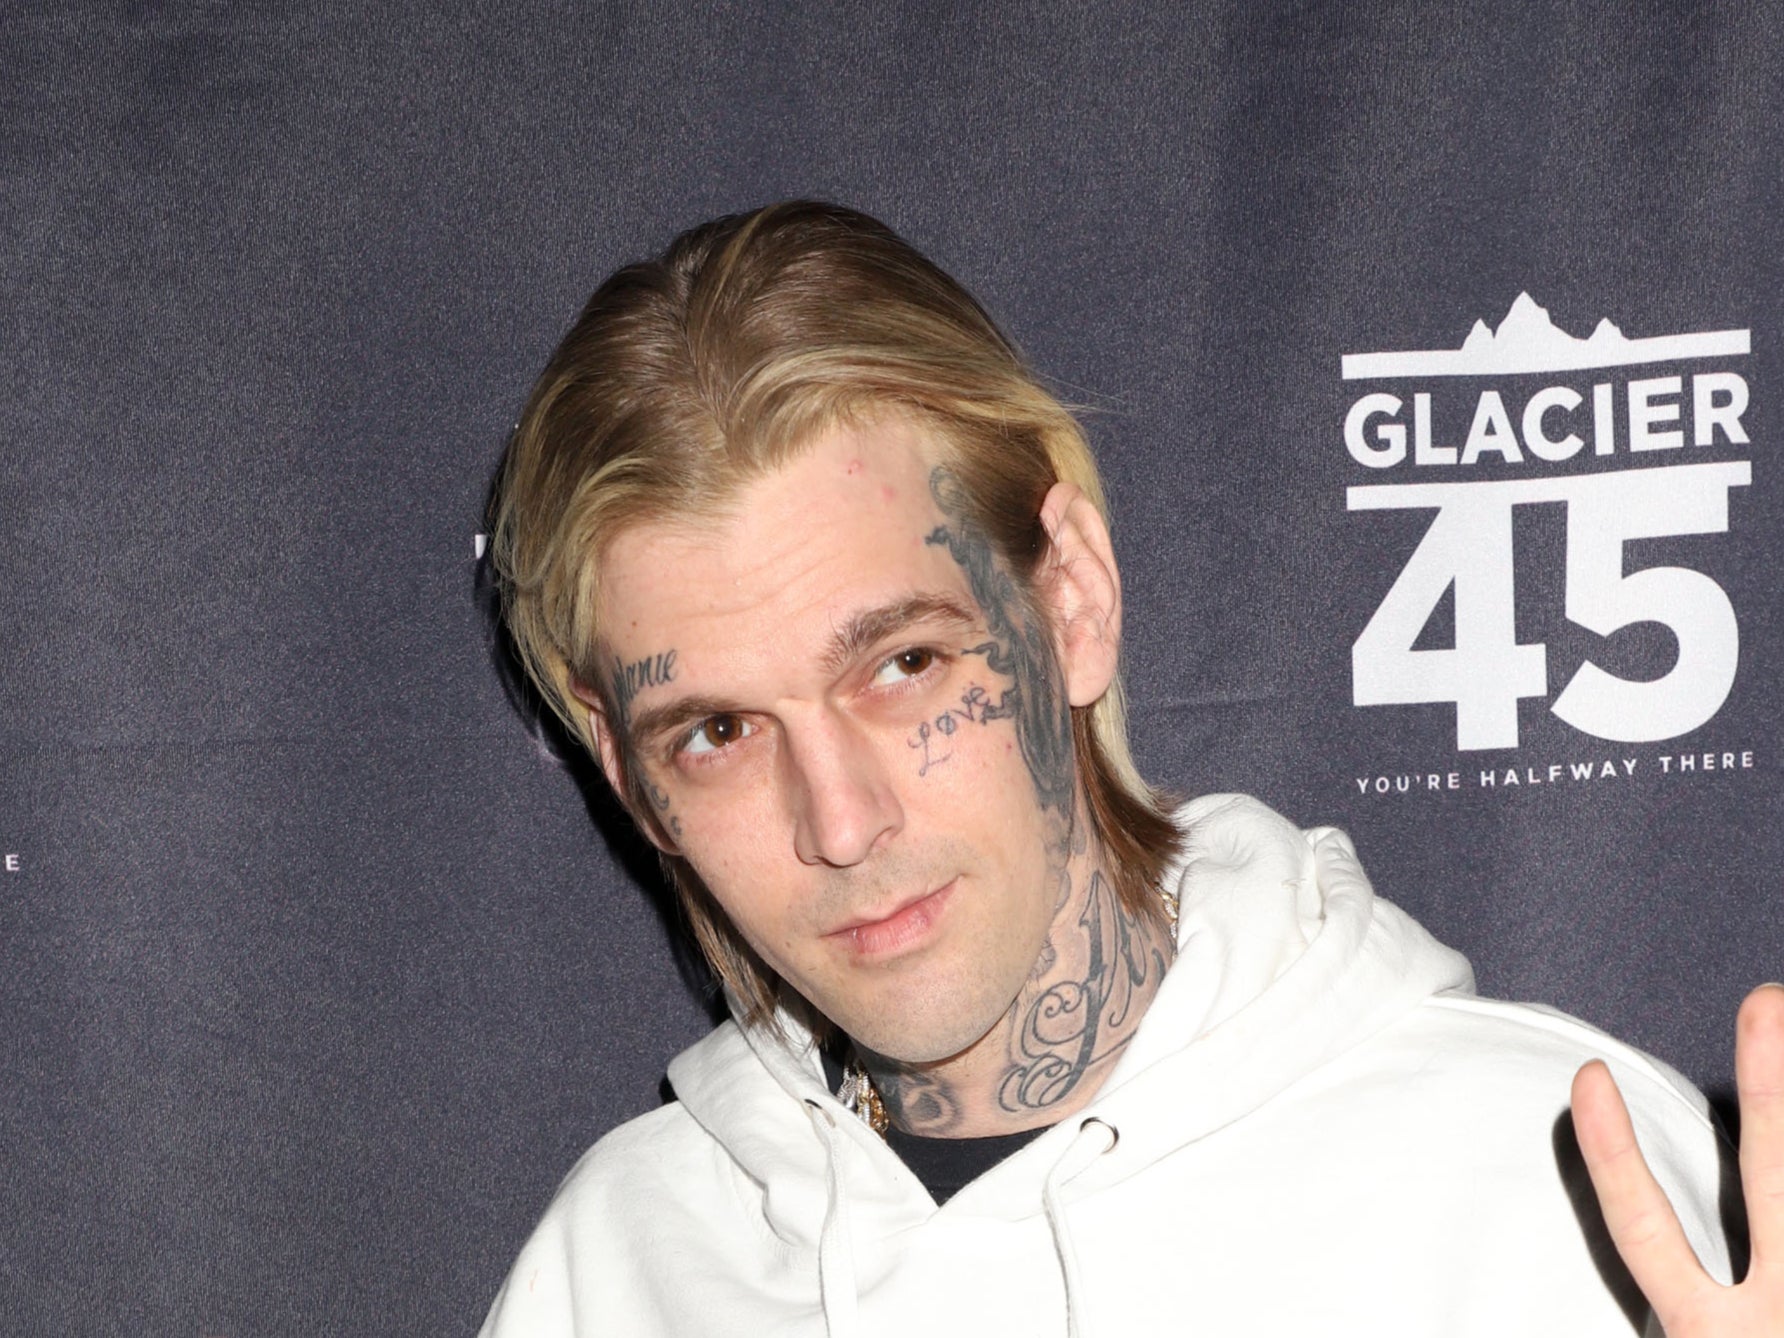 Aaron Carter’s cause of death is being ‘investigated’